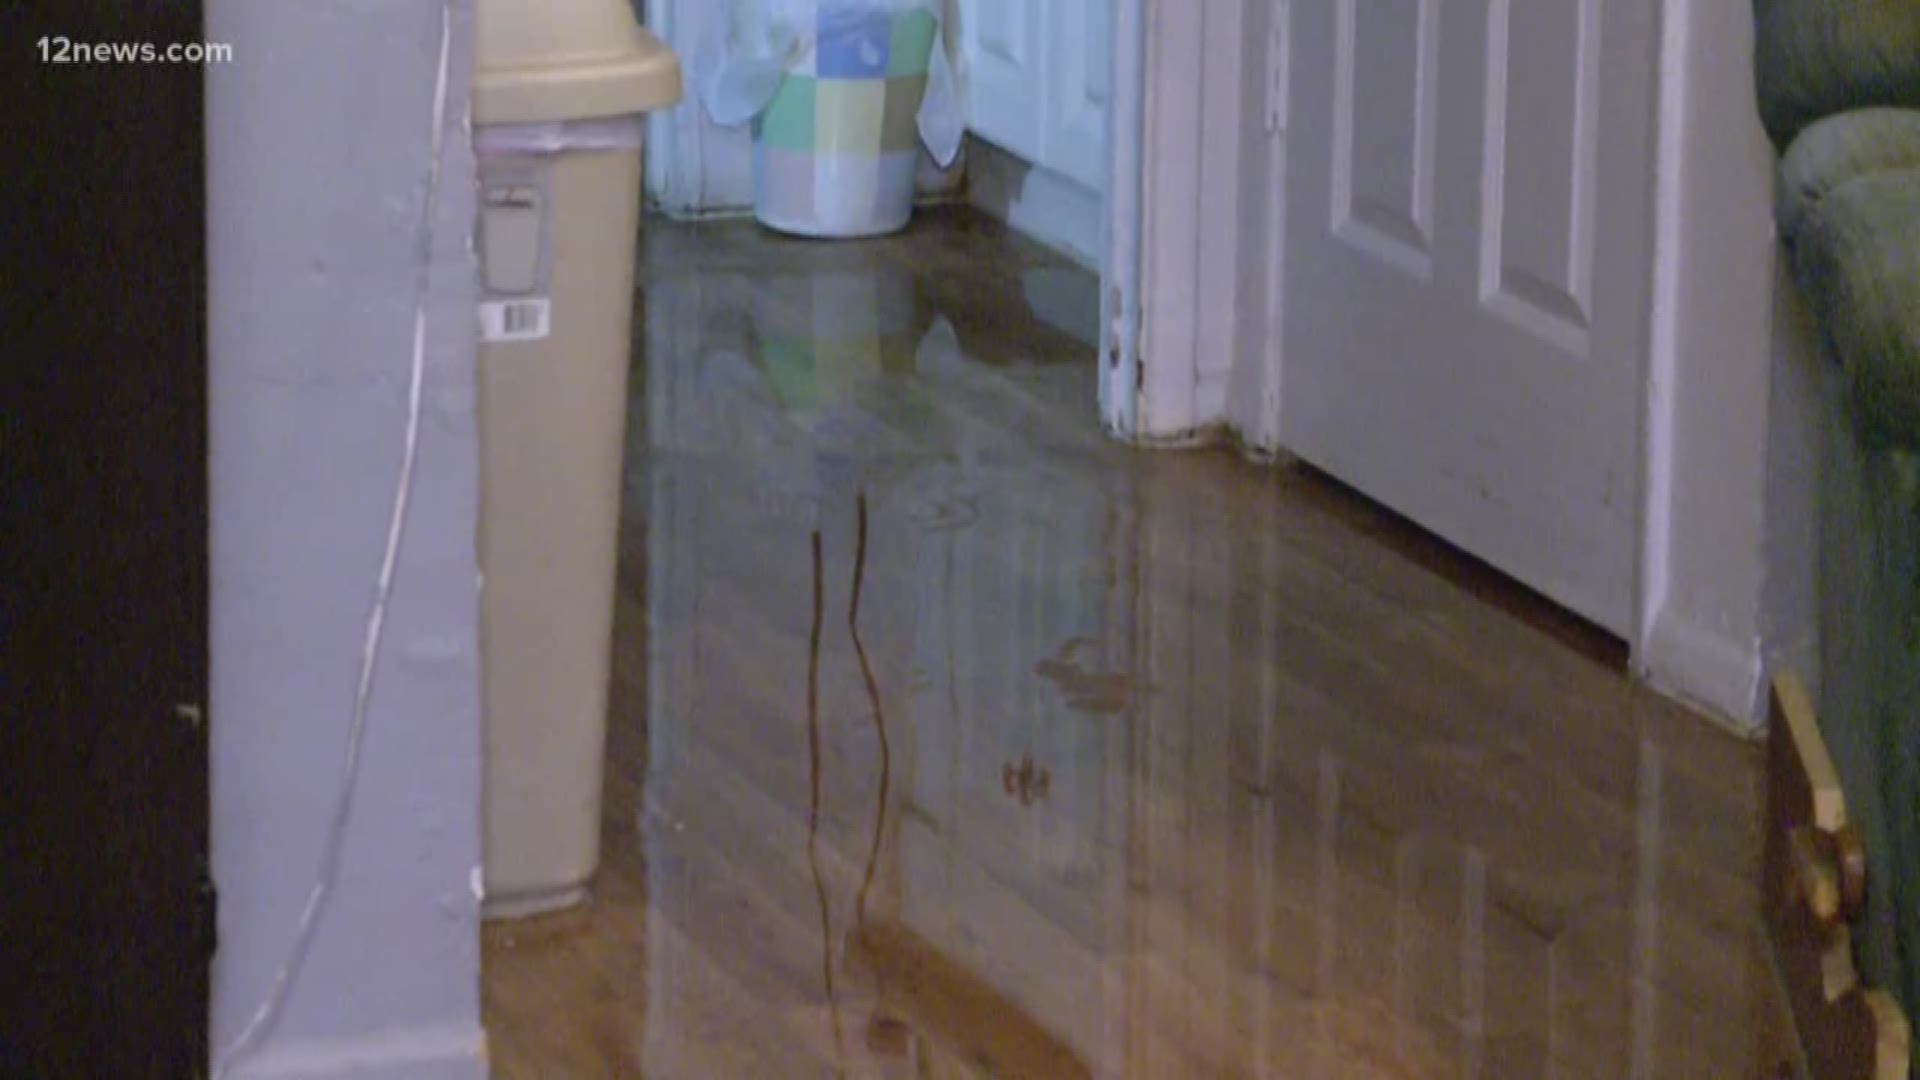 About 30 residents had their apartments flooded with heavy monsoon rain in Mesa last night. While they clean up, they are worried about the next round of storms.